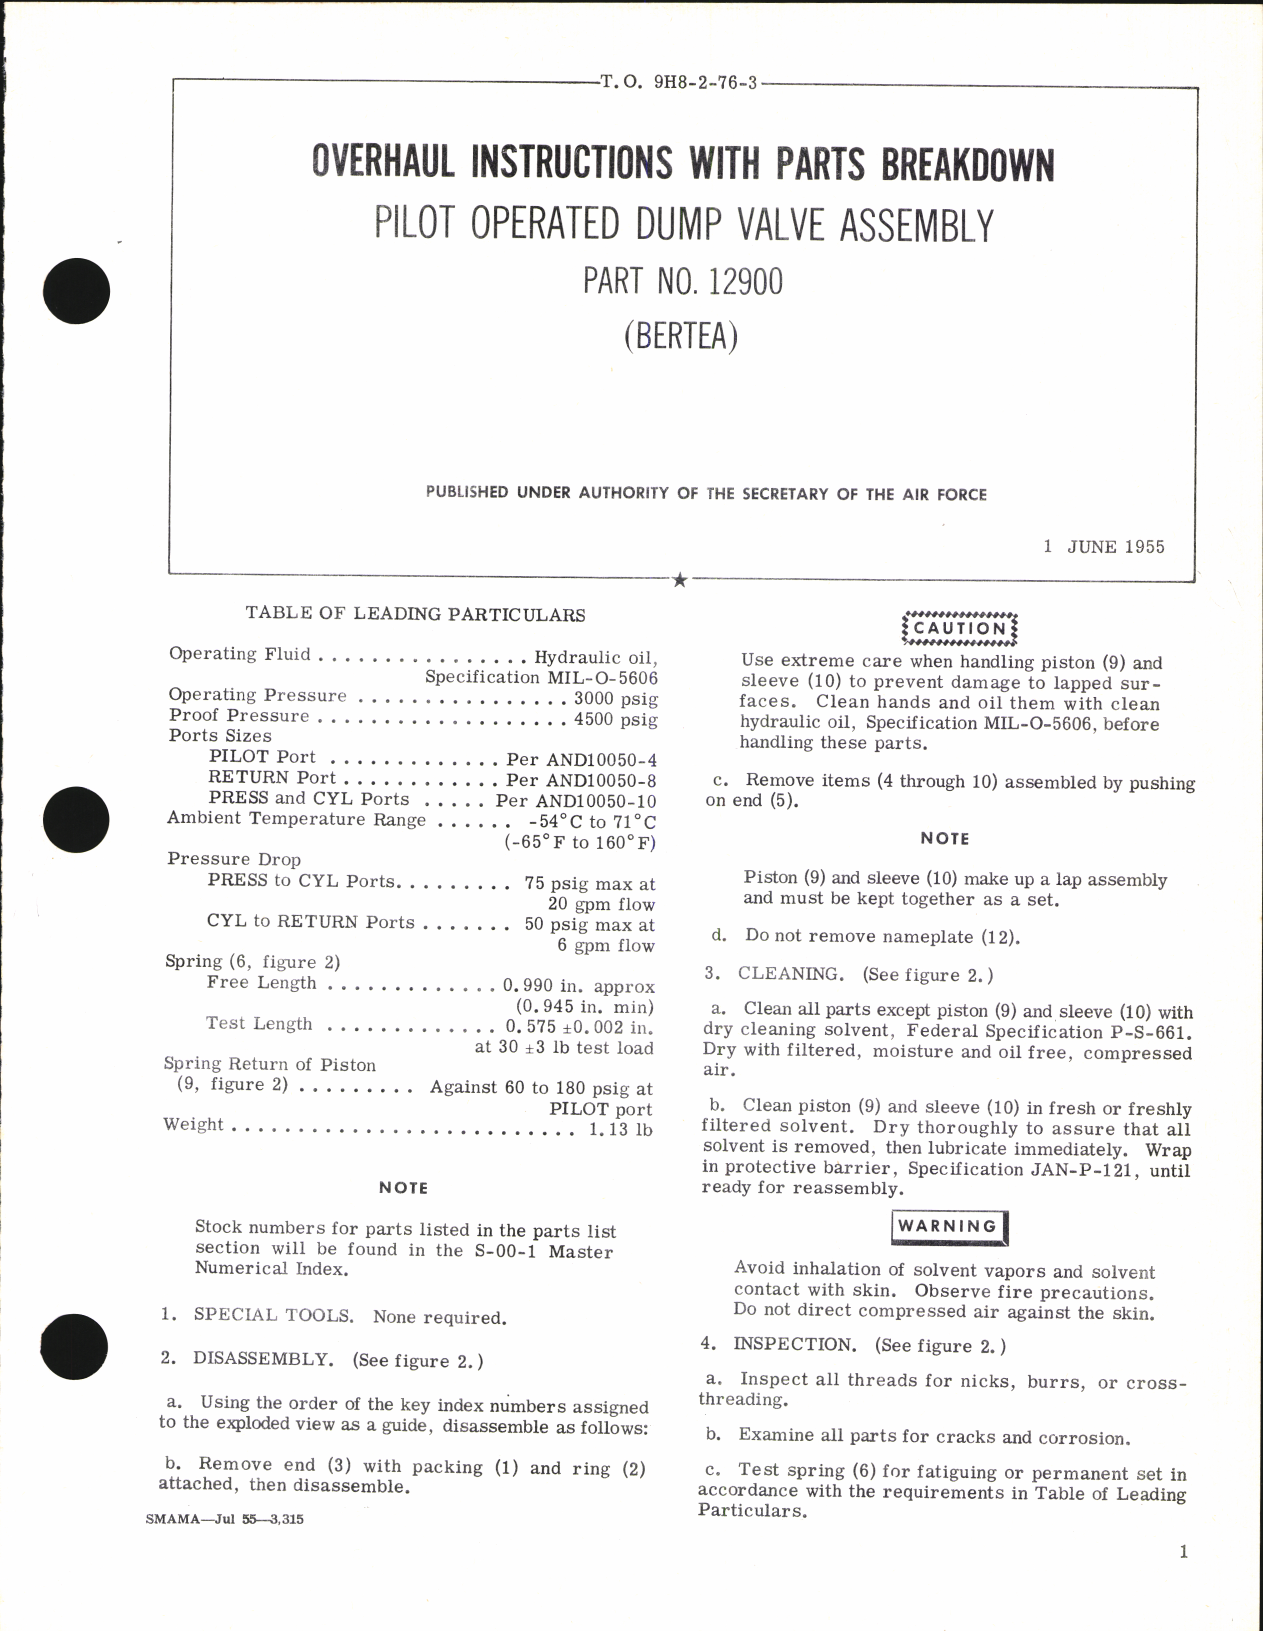 Sample page 1 from AirCorps Library document: Overhaul Instructions with Parts Breakdown for Pilot Dump Valve Assembly Part No. 12900